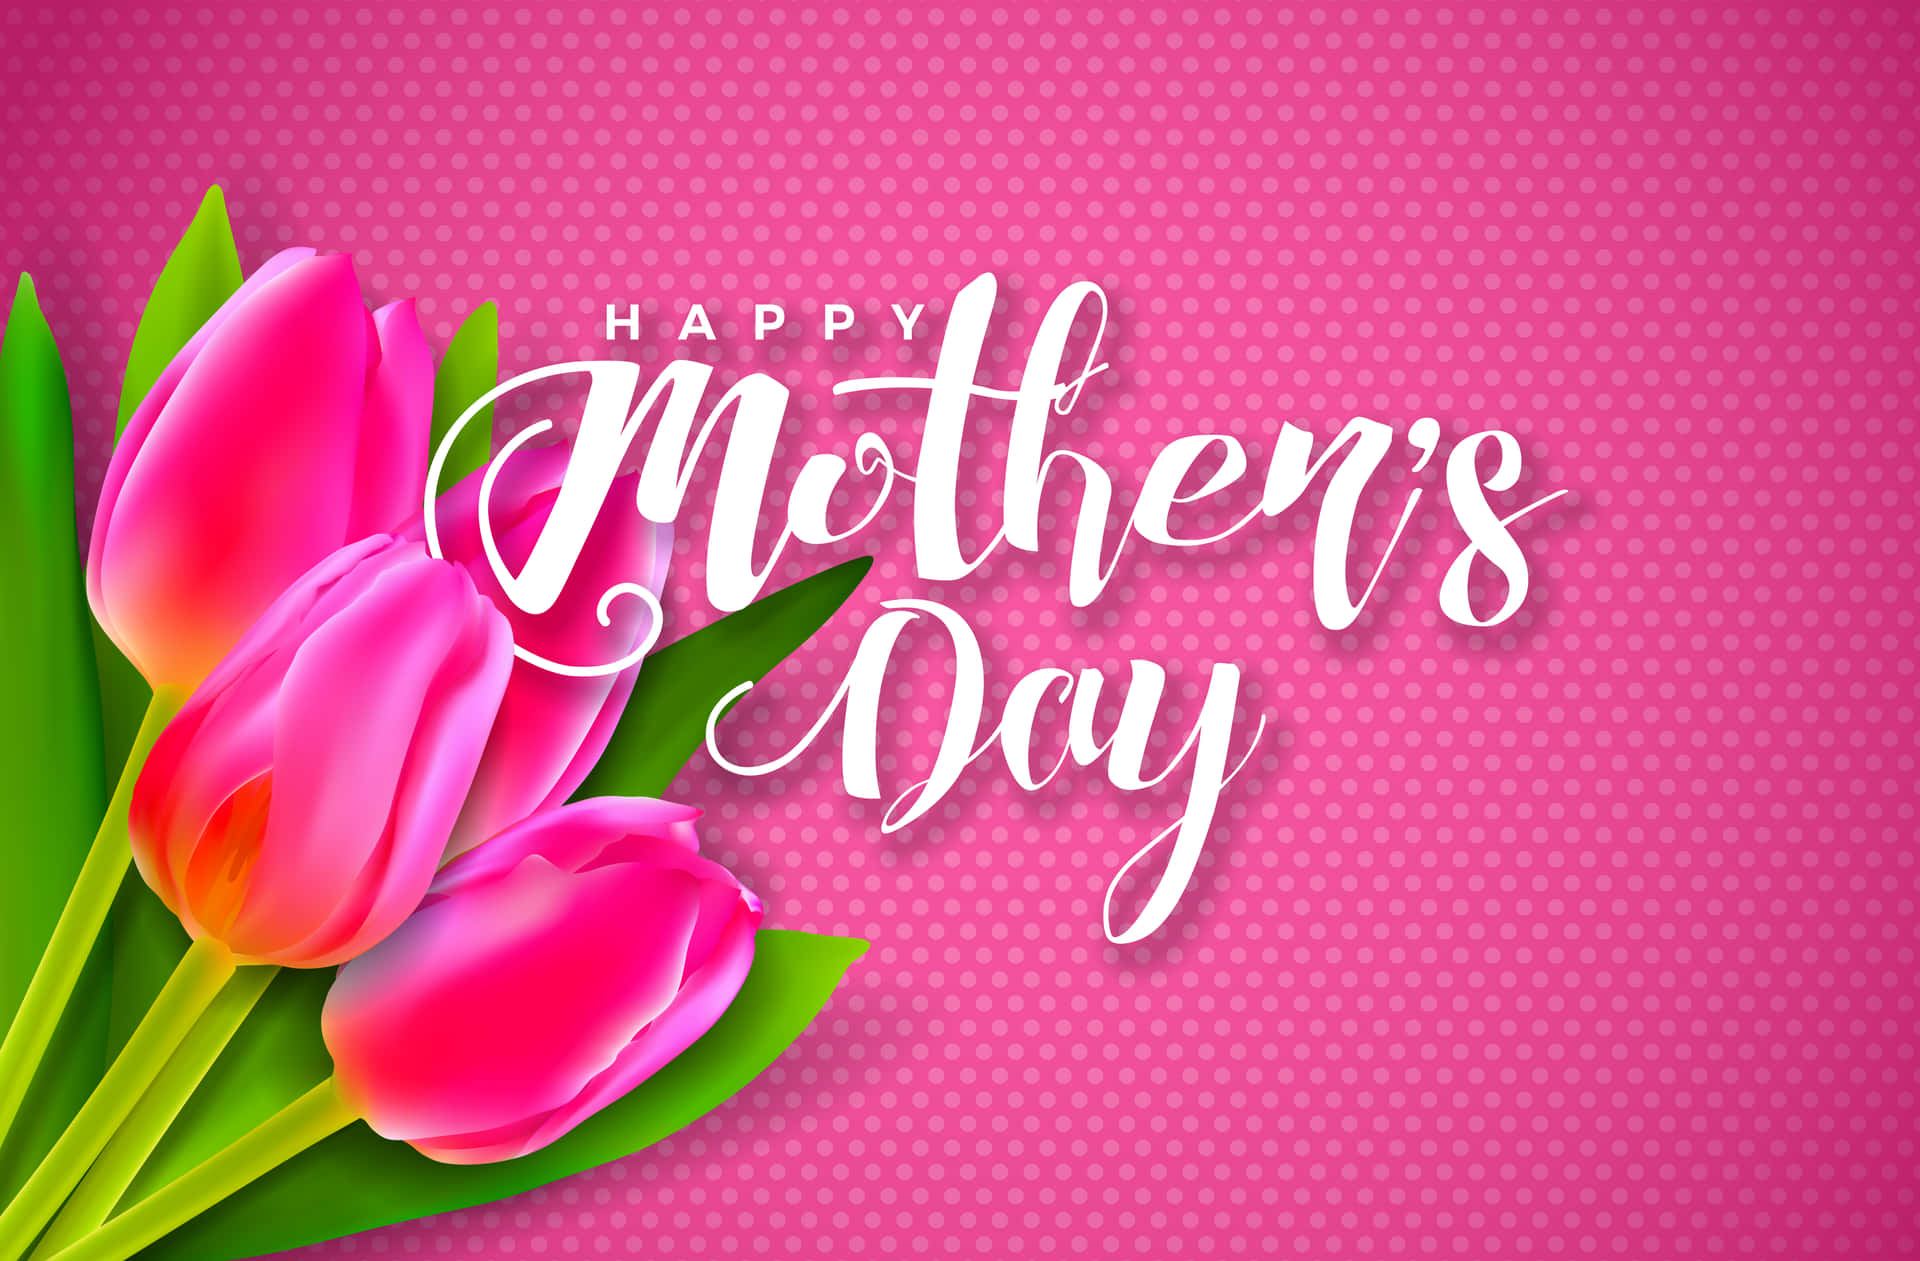 Wishing you a Happy Mother's Day!